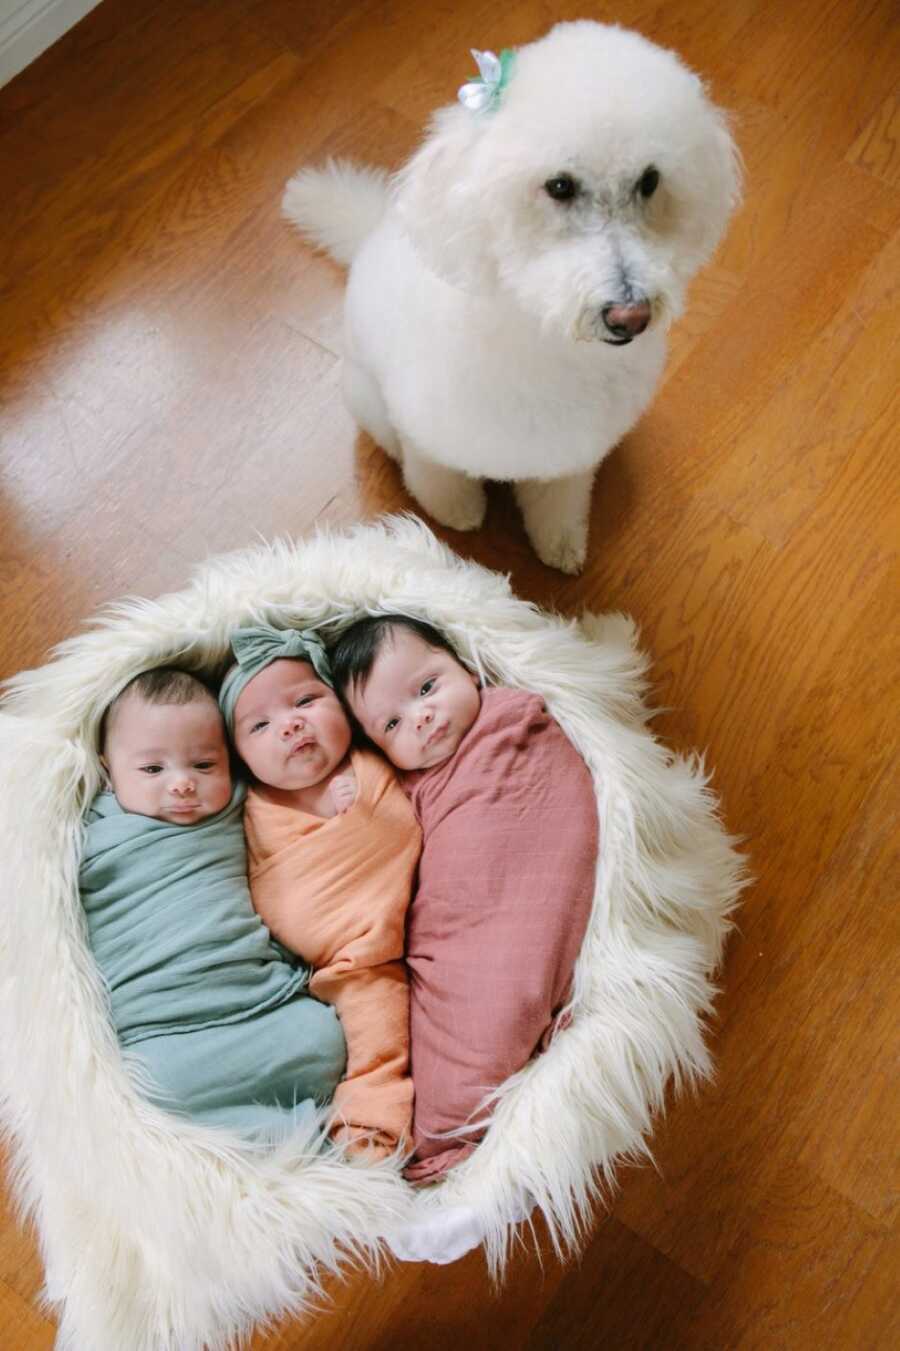 Two moms take a photo of their newborn triplets all swaddled together in different-colored blankets while their family dog sits next to them